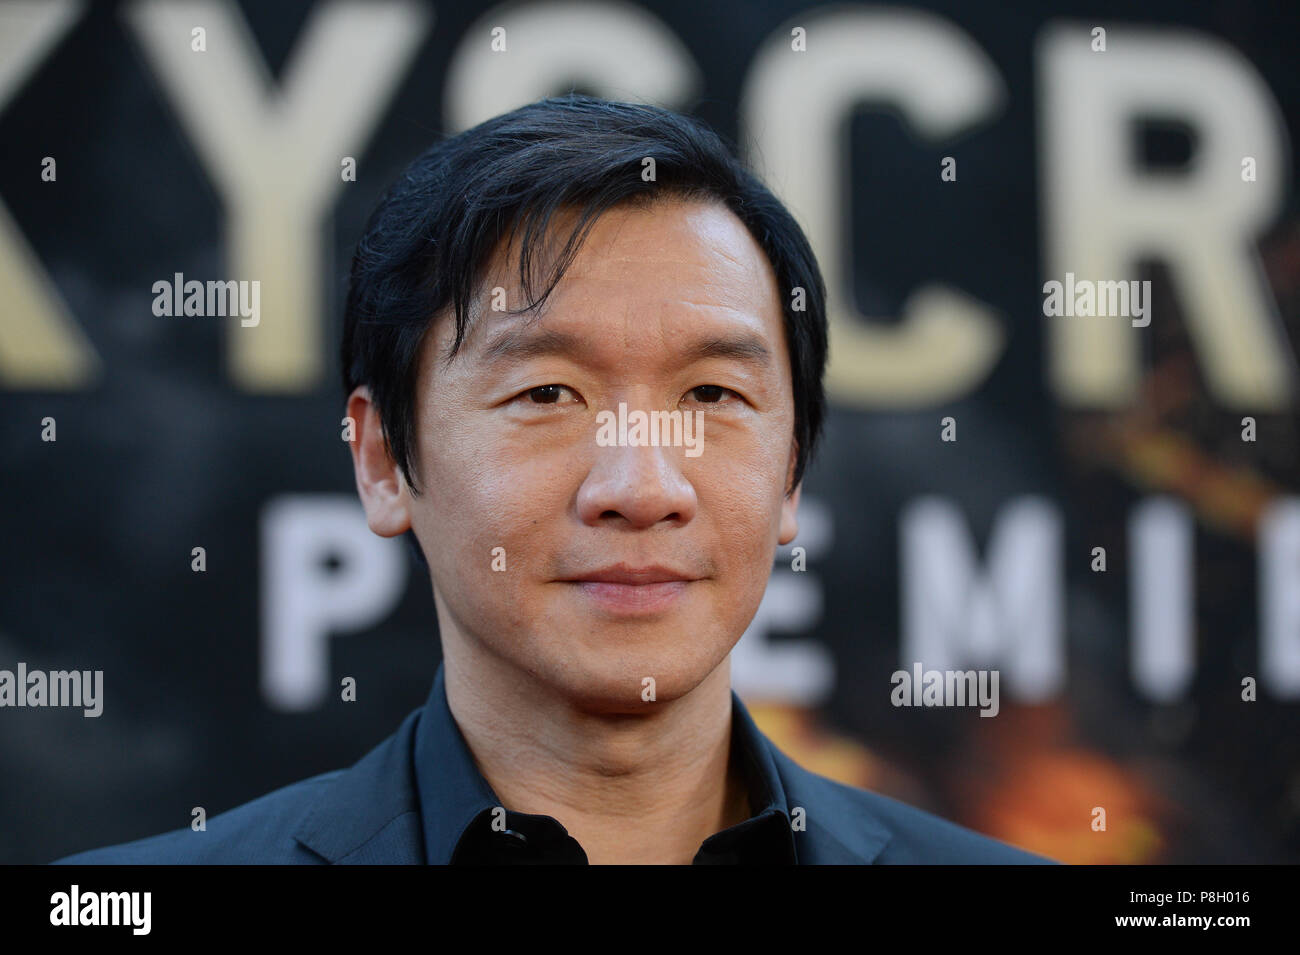 New York, USA. 10th July 2018. Ng Chin Han attends the 'Skyscraper' New York premiere at AMC Loews Lincoln Square on July 10, 2018 in New York City. Credit: Erik Pendzich/Alamy Live News Stock Photo